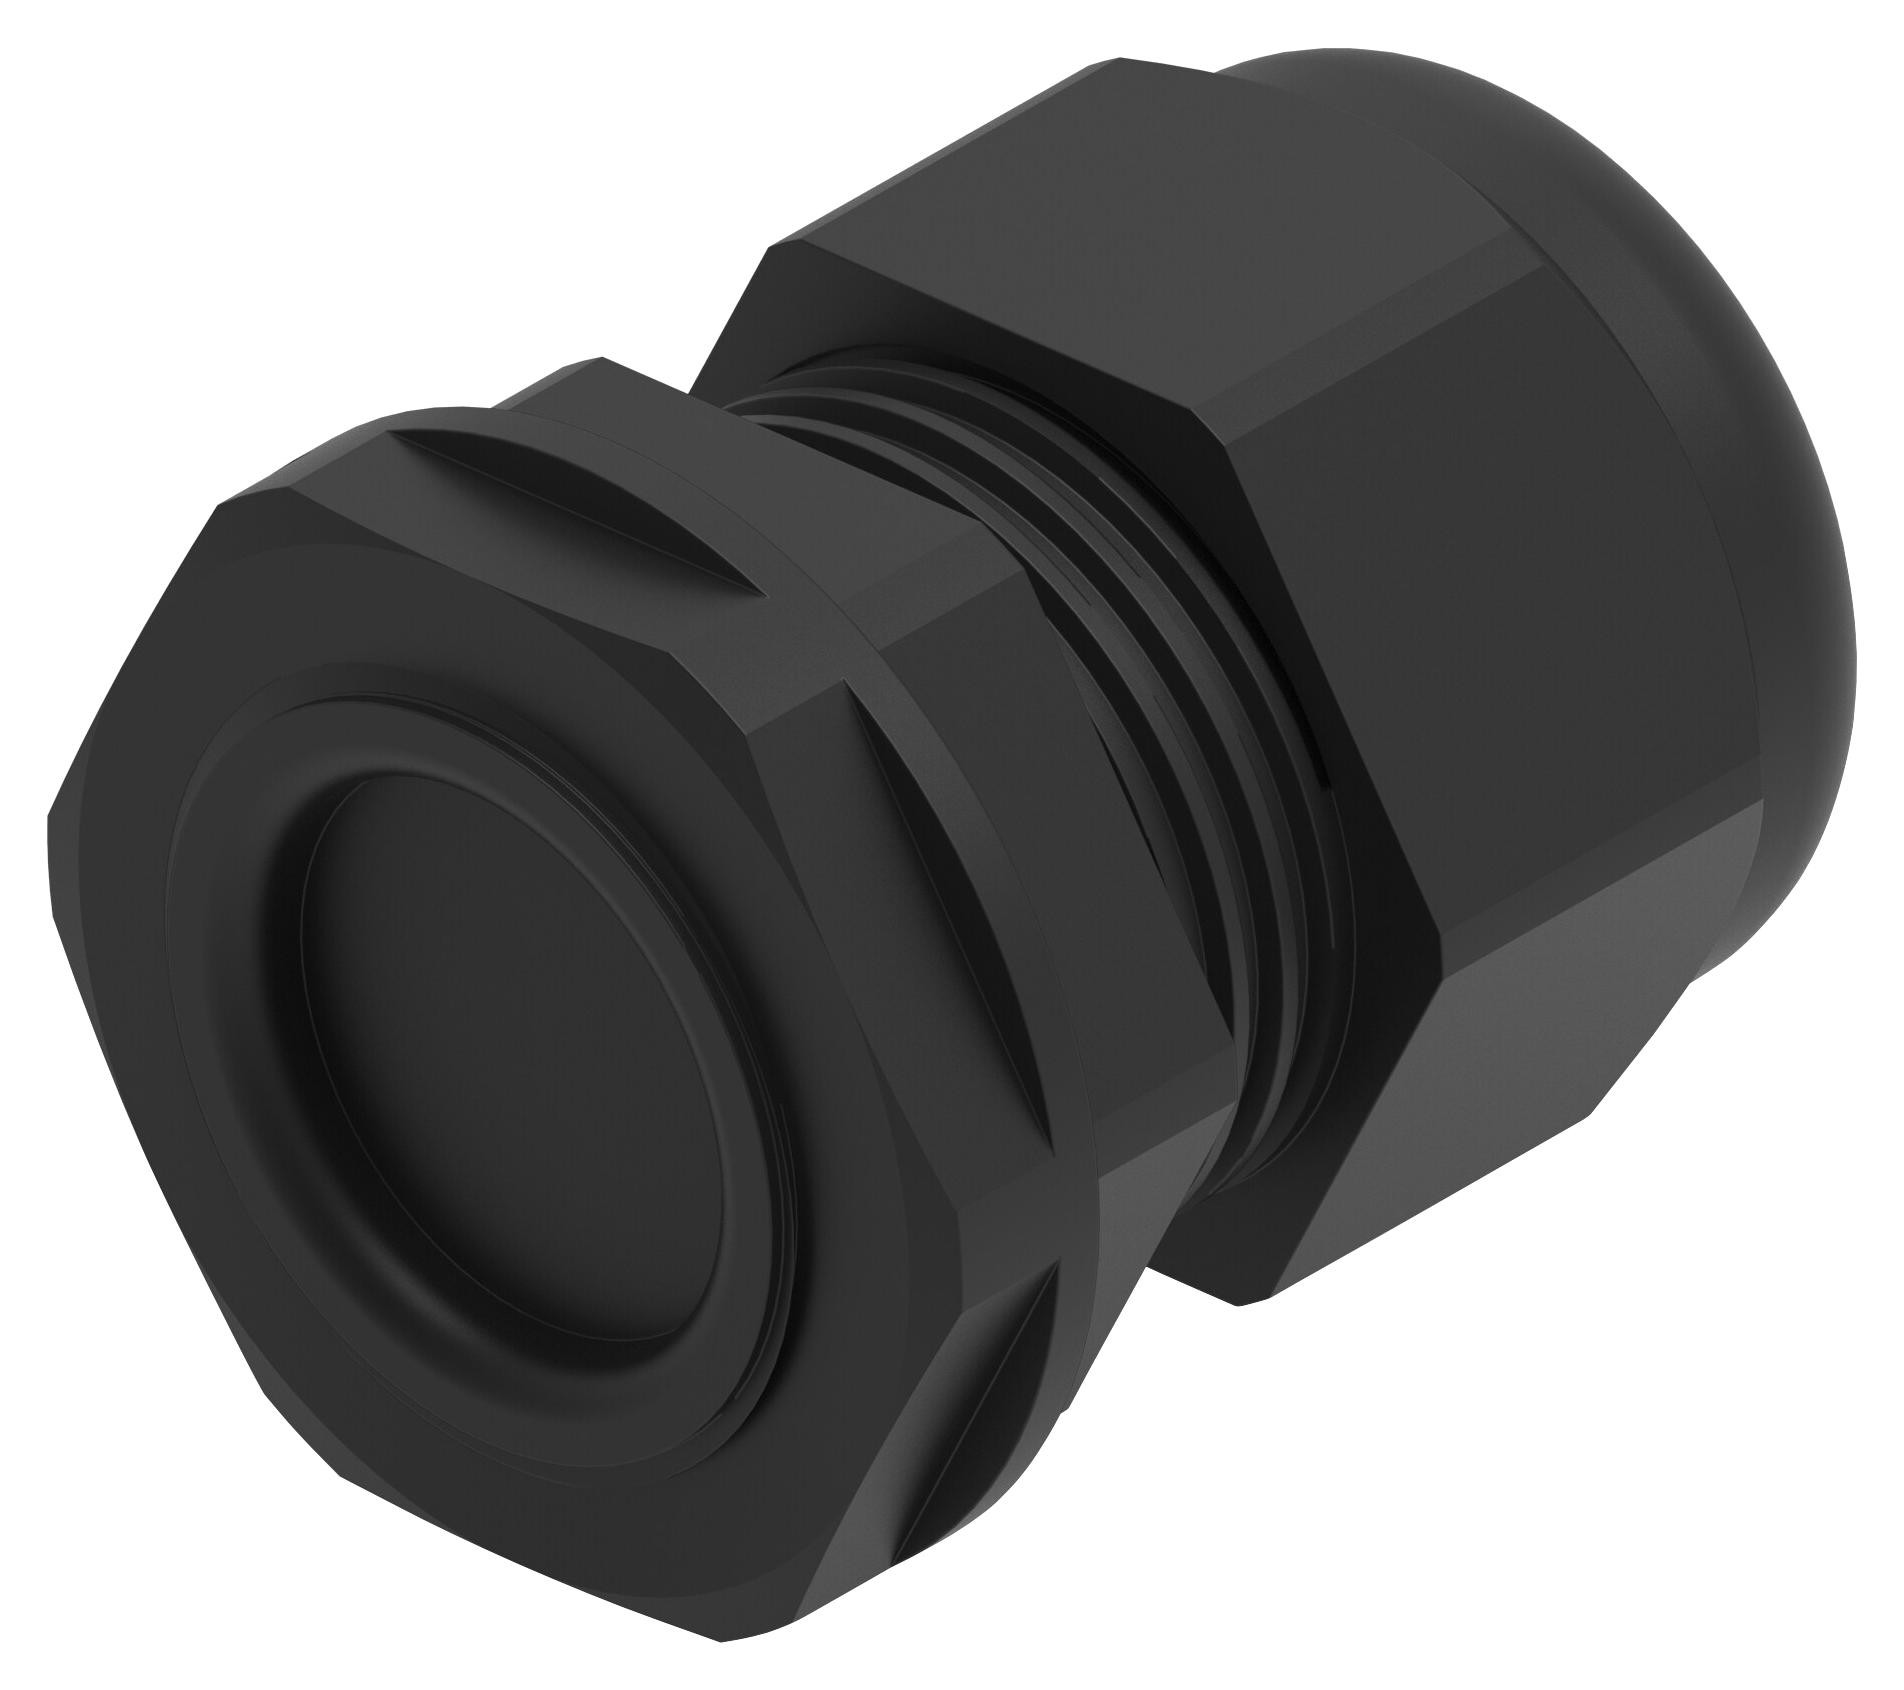 Entrelec TE Connectivity 1Sng626072R0000 Cable Gland, M25, 11mm-17mm, Ip66/ip68